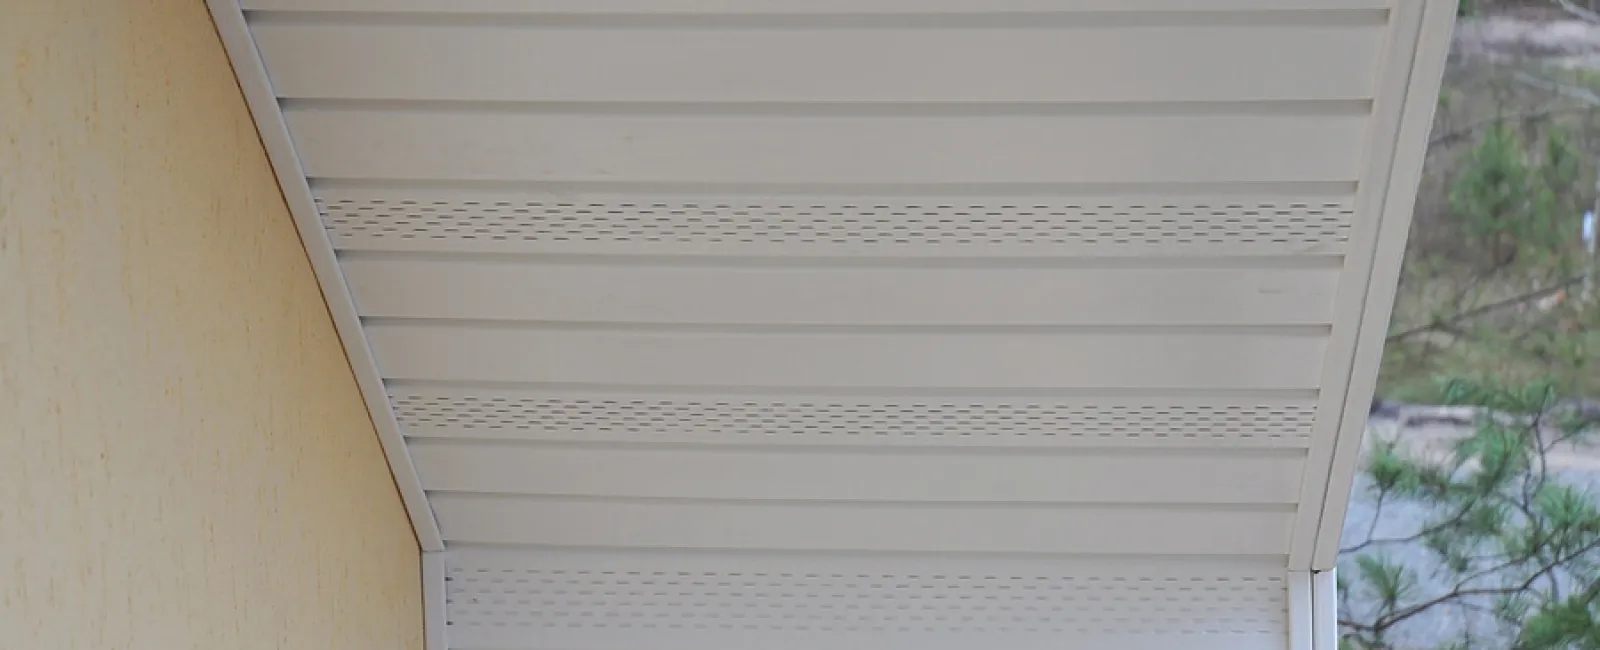 What Are Soffits, and Why Are They Important?